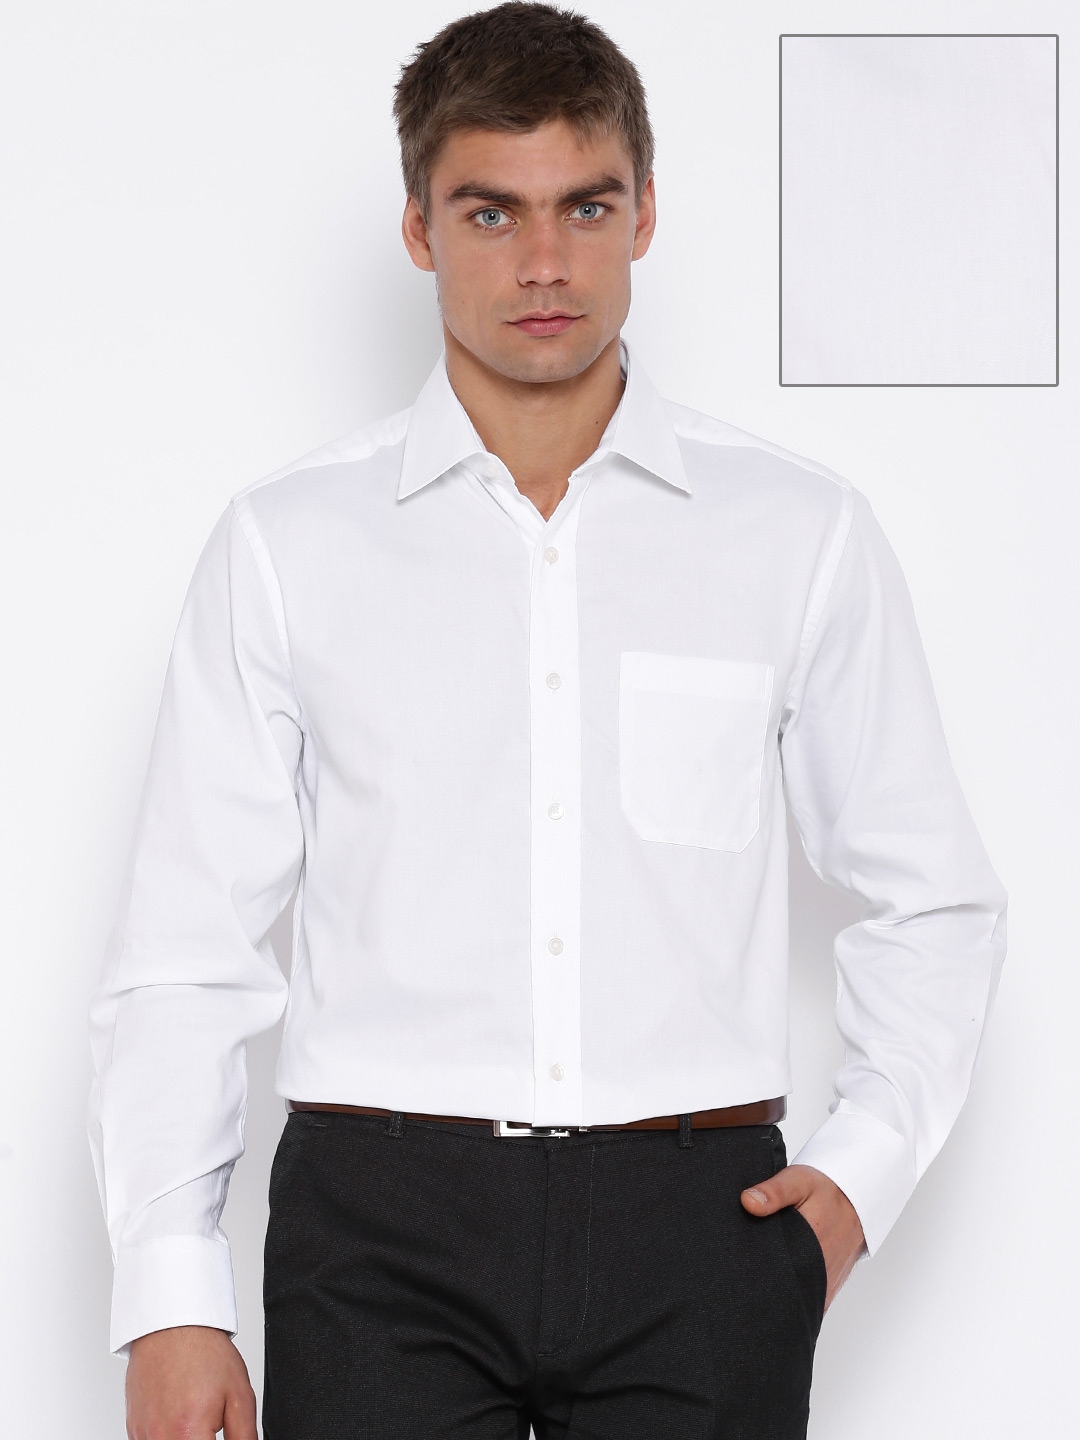 Buy CODE By Lifestyle White Formal Shirt - Shirts for Men 1140457 | Myntra